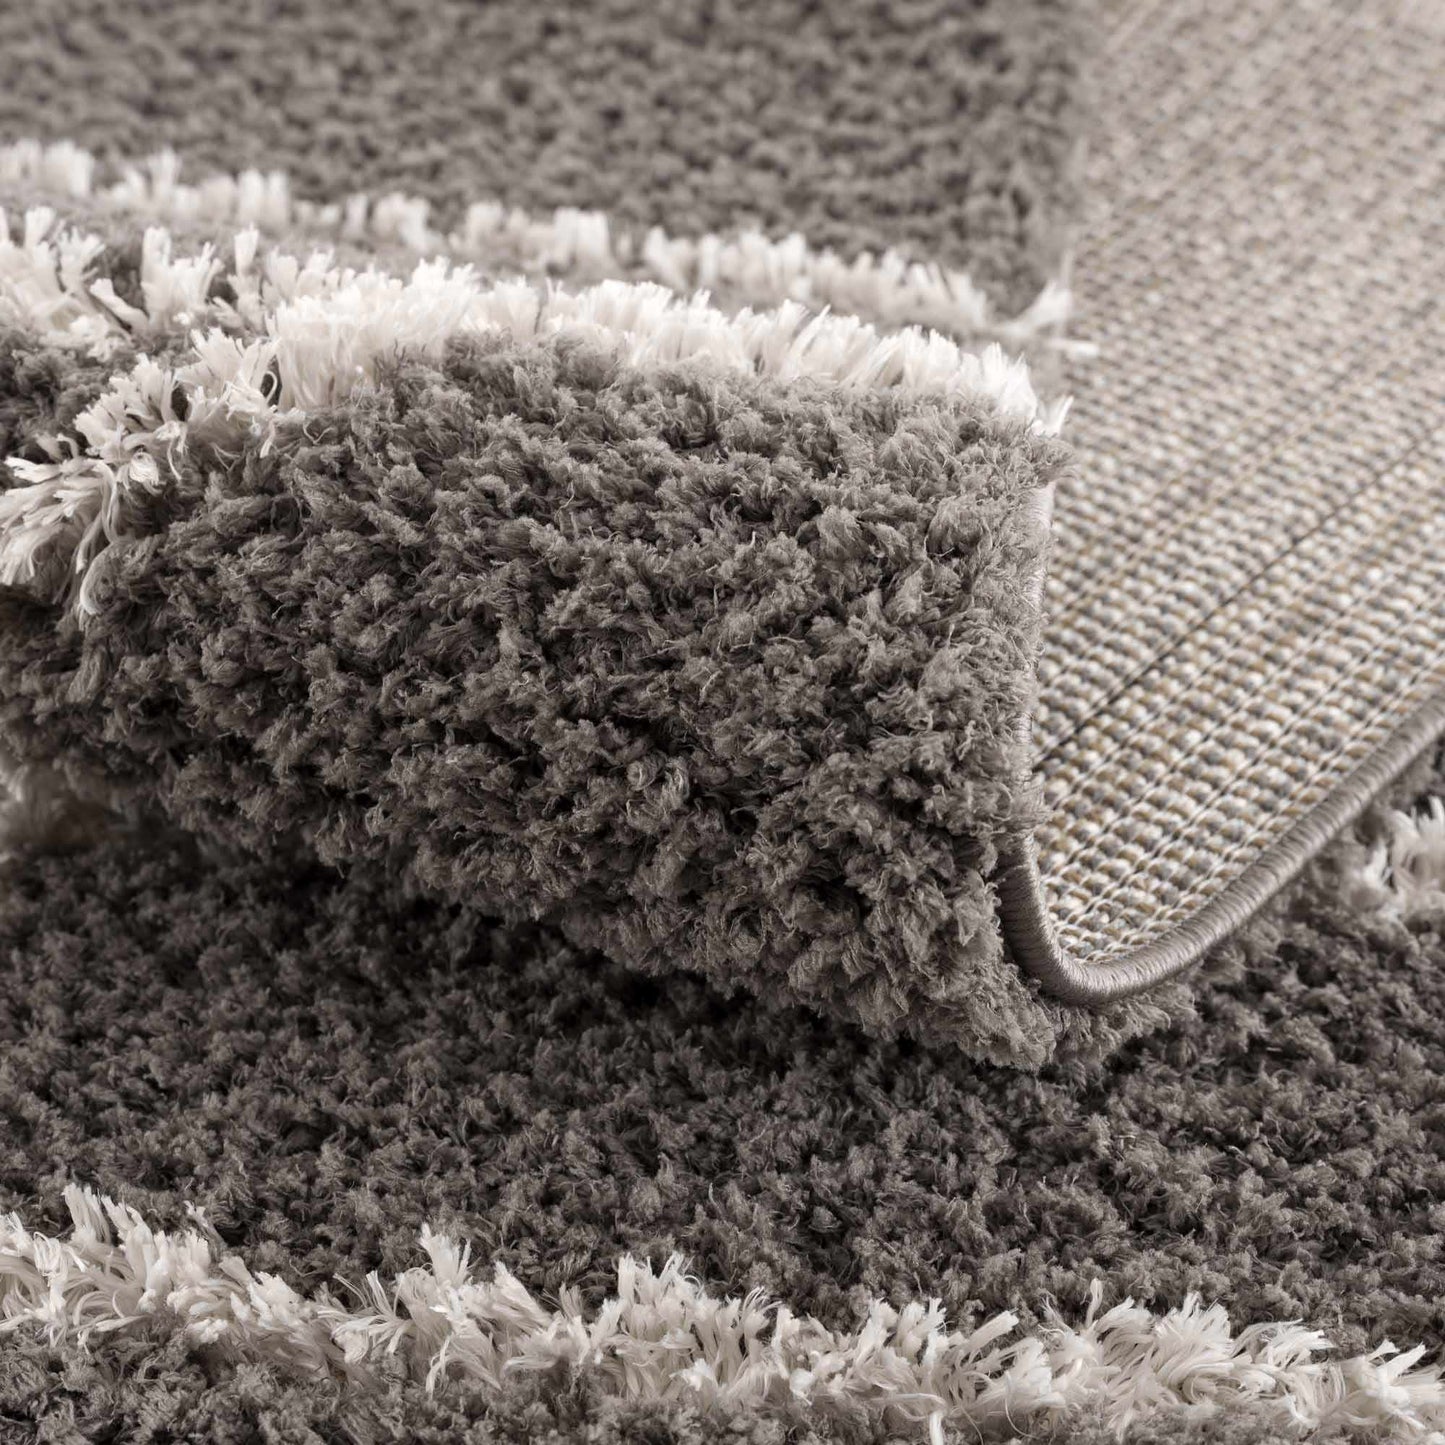 Andia Charcoal Area Rug - Clearance